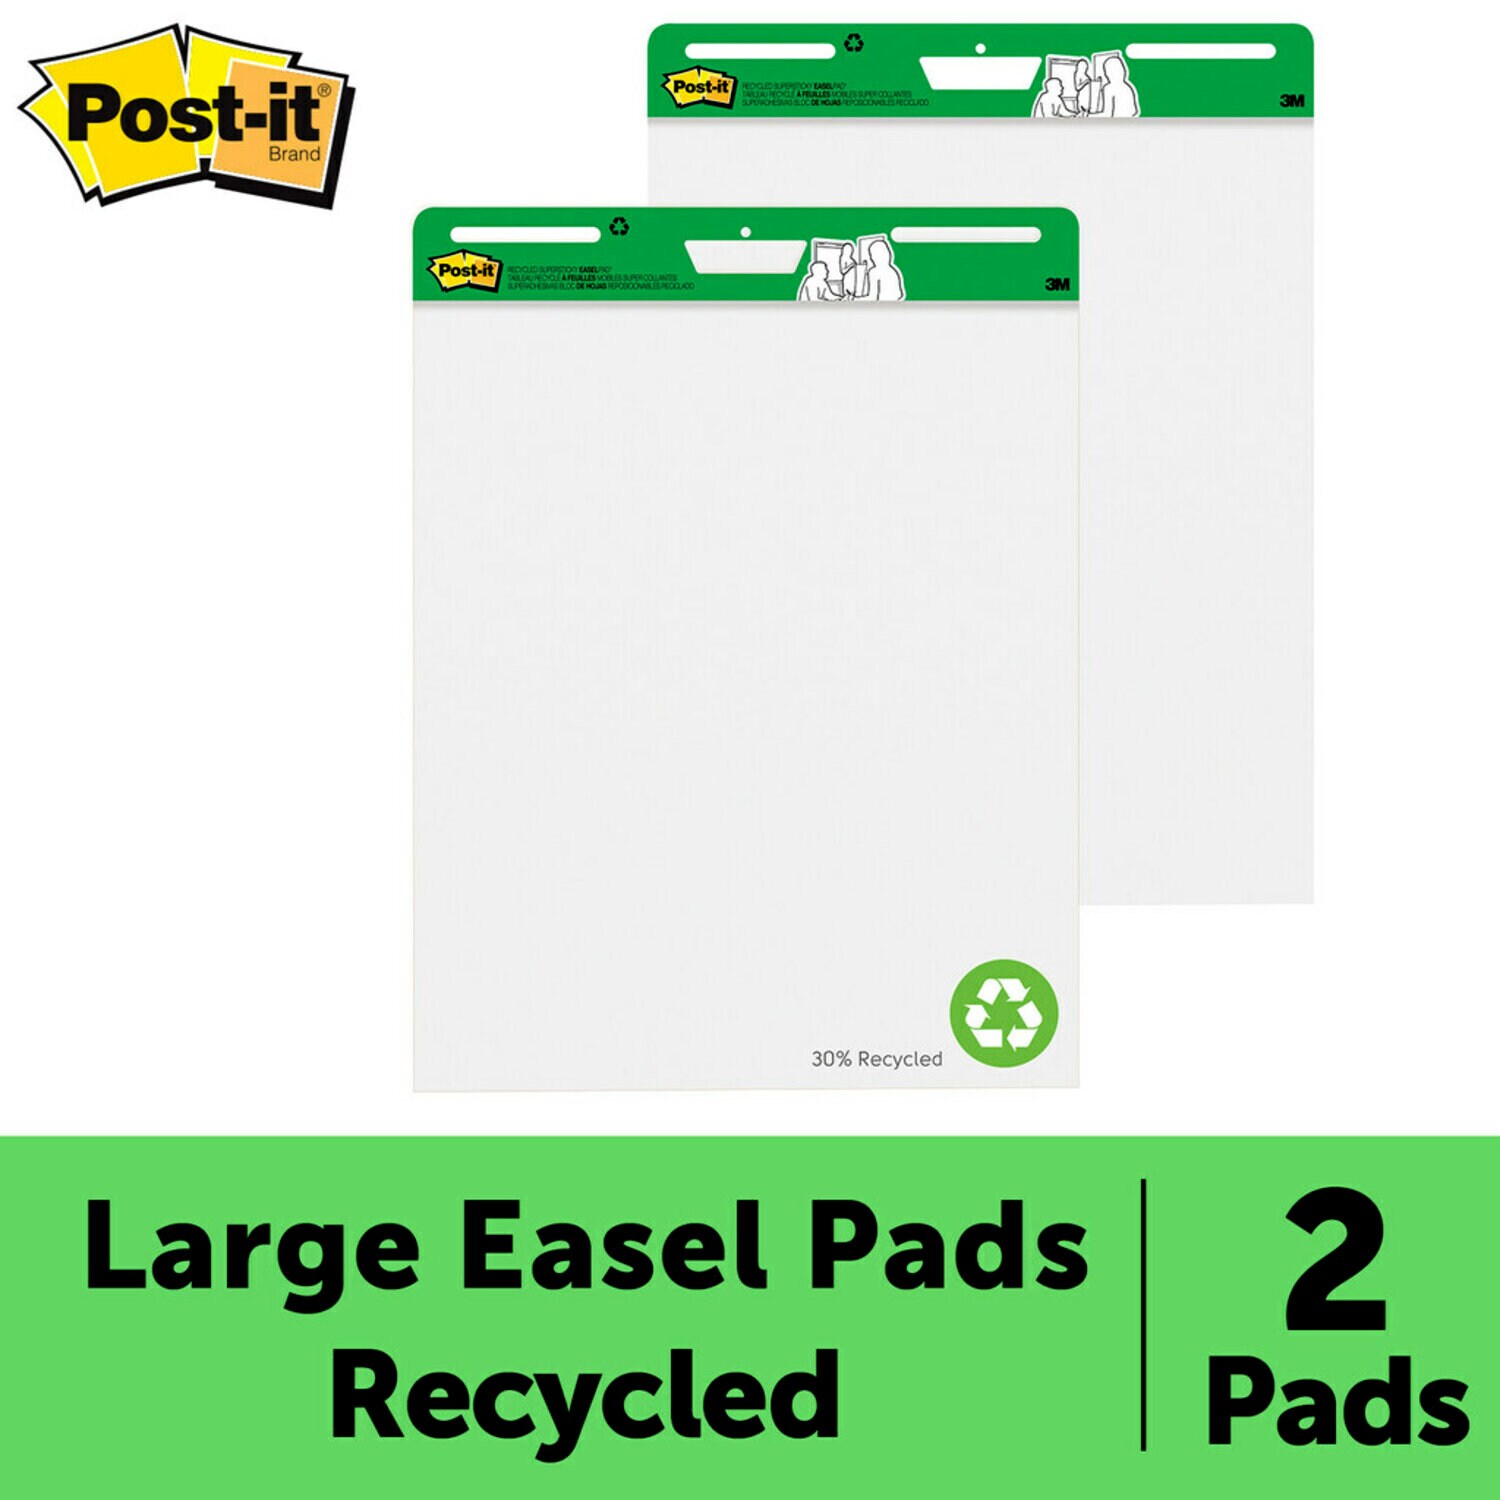 7100083057 - Post-it Super Sticky Easel Pad 559RP, 25 in. x 30 in. Recycled, 2 pk